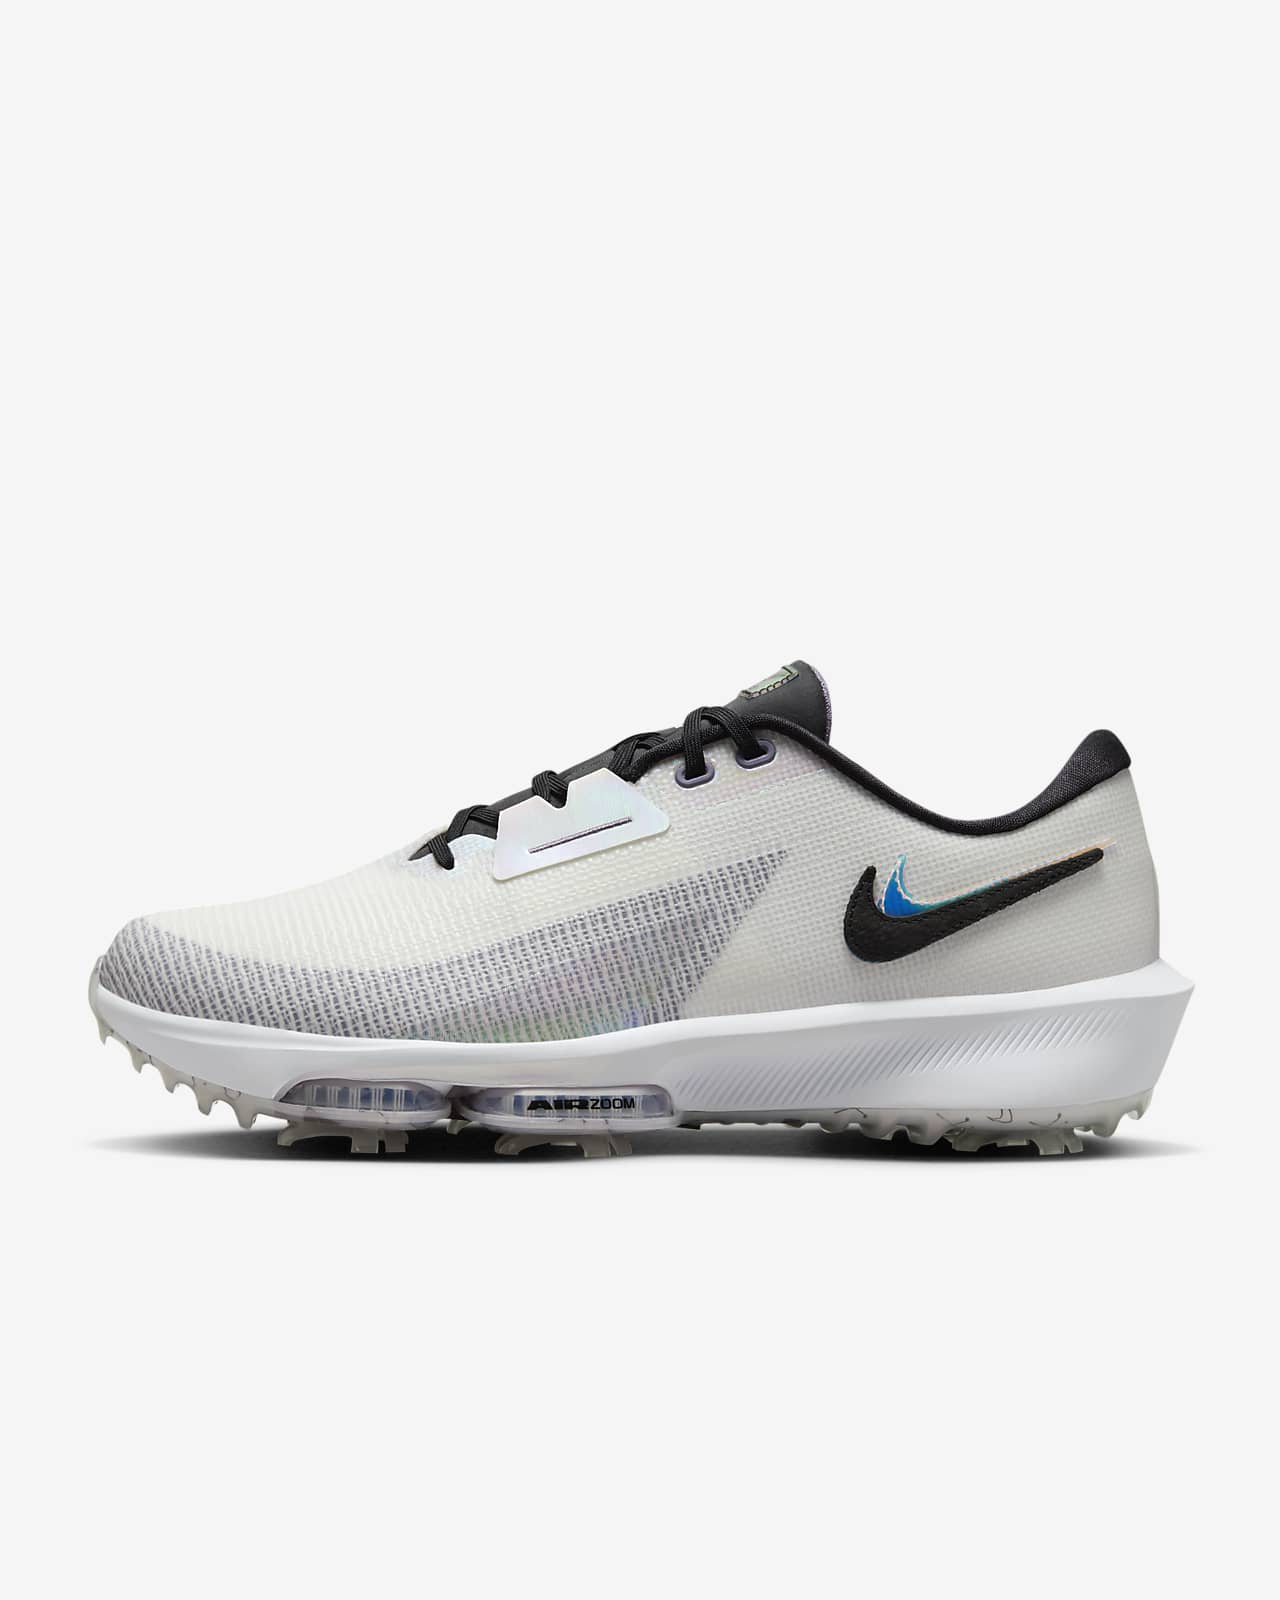 Comfort in Nike Golf Shoes